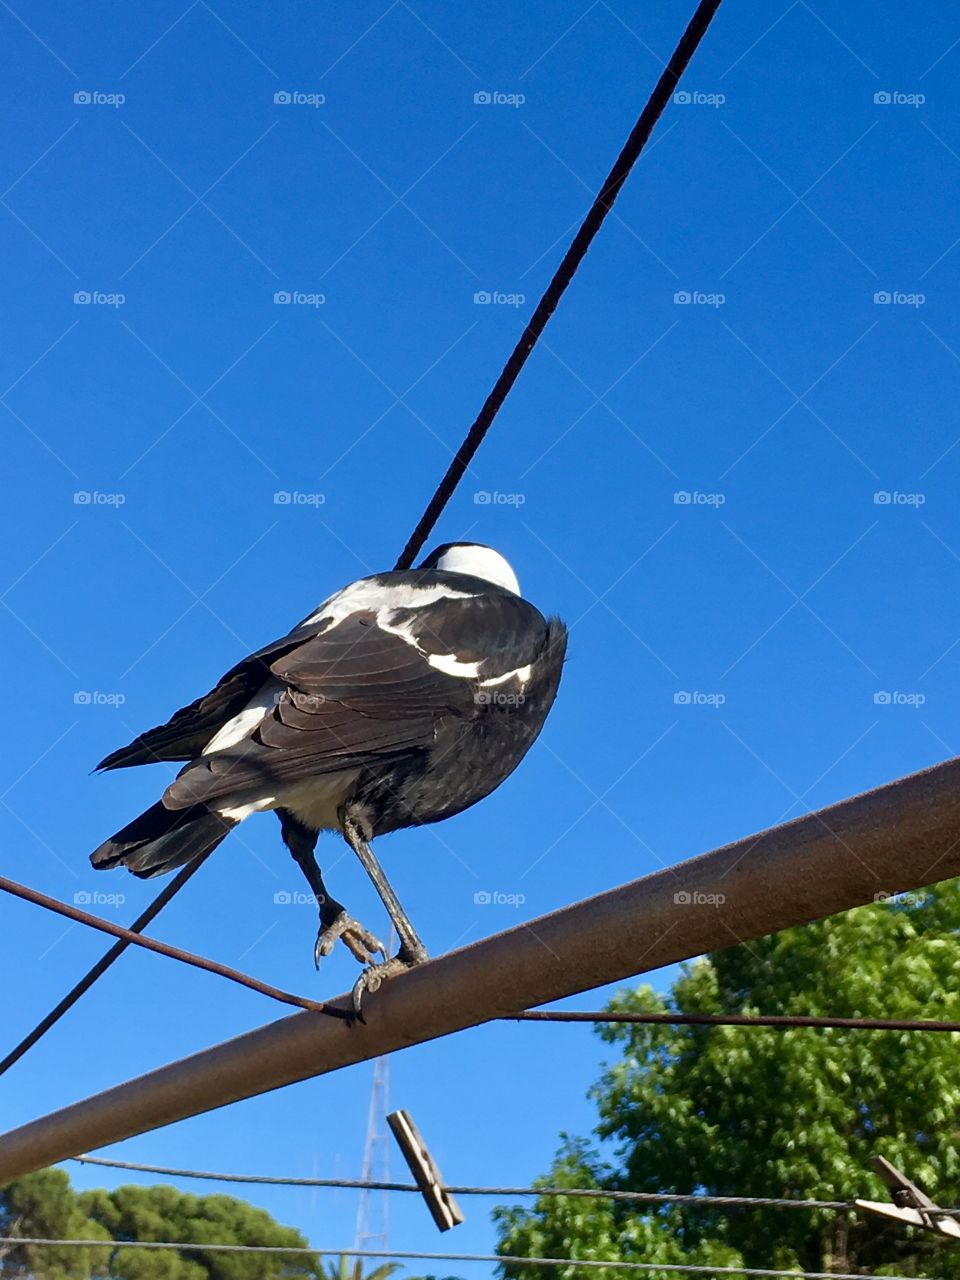 Magpie sitting on a high clothes wire back view of dump and feathers against a vivid blue sky